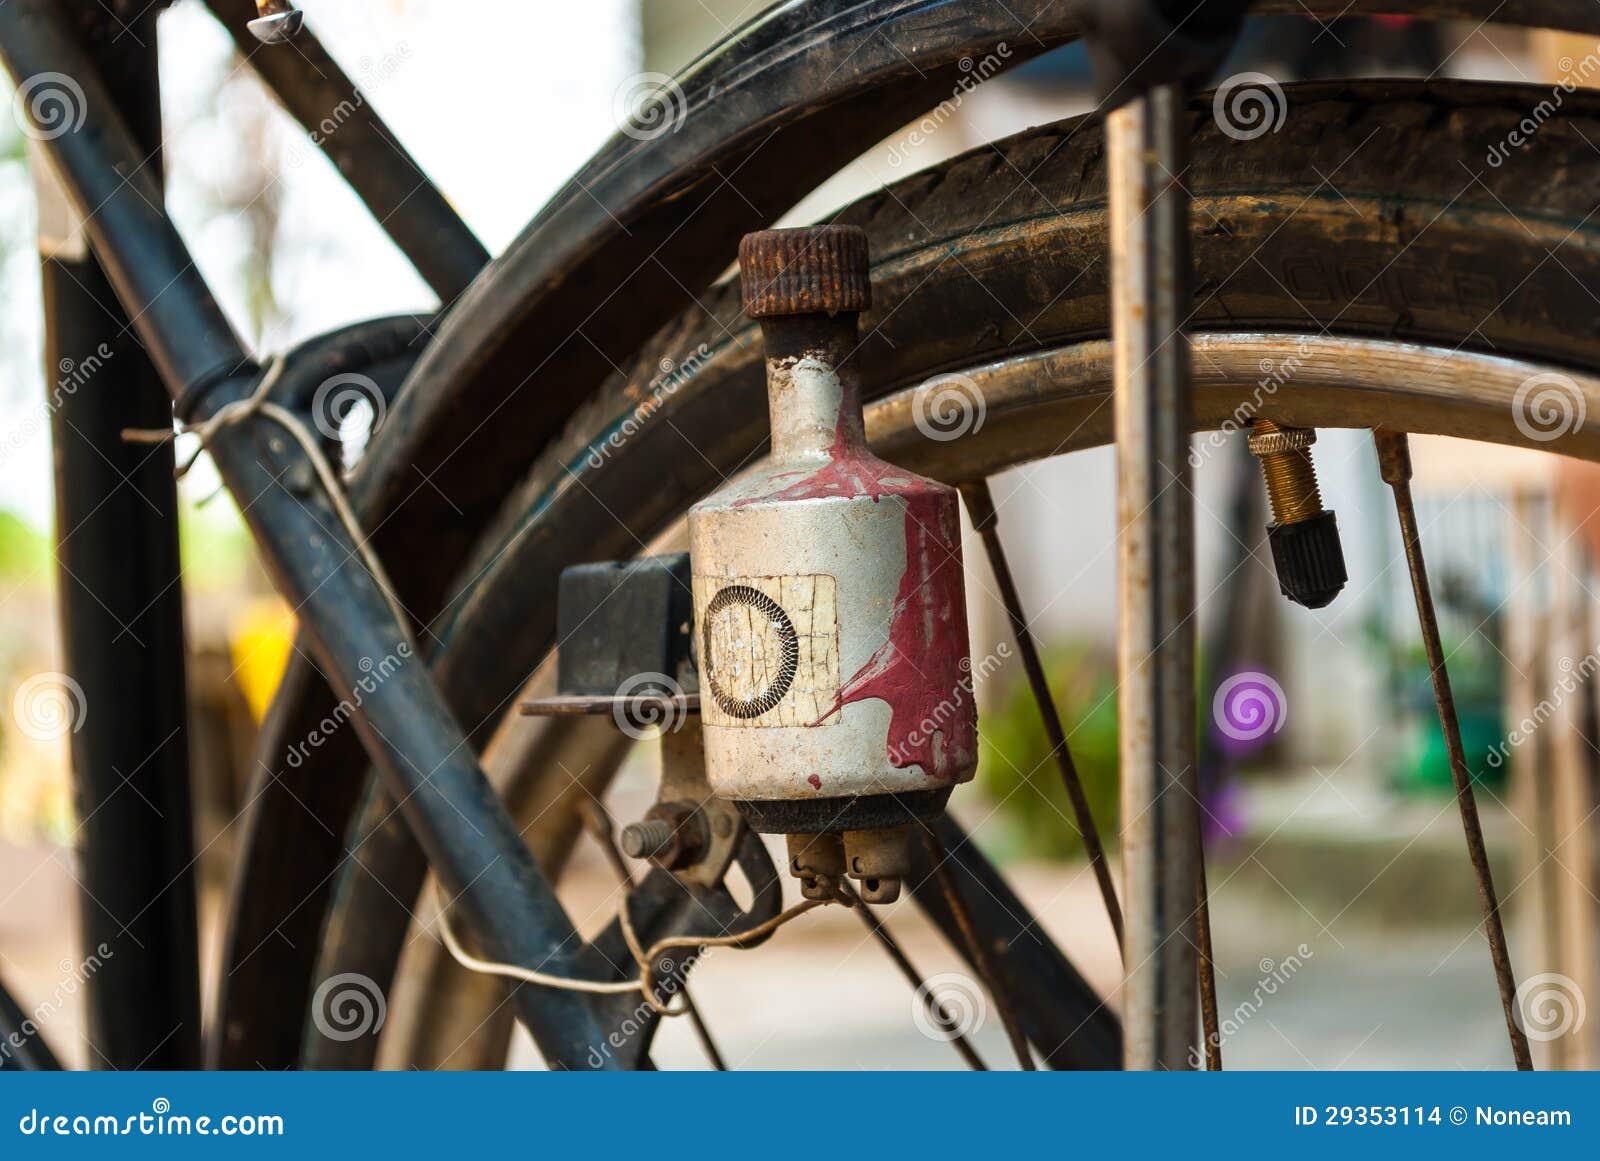 electric generator (dynamo) on antique bicycle